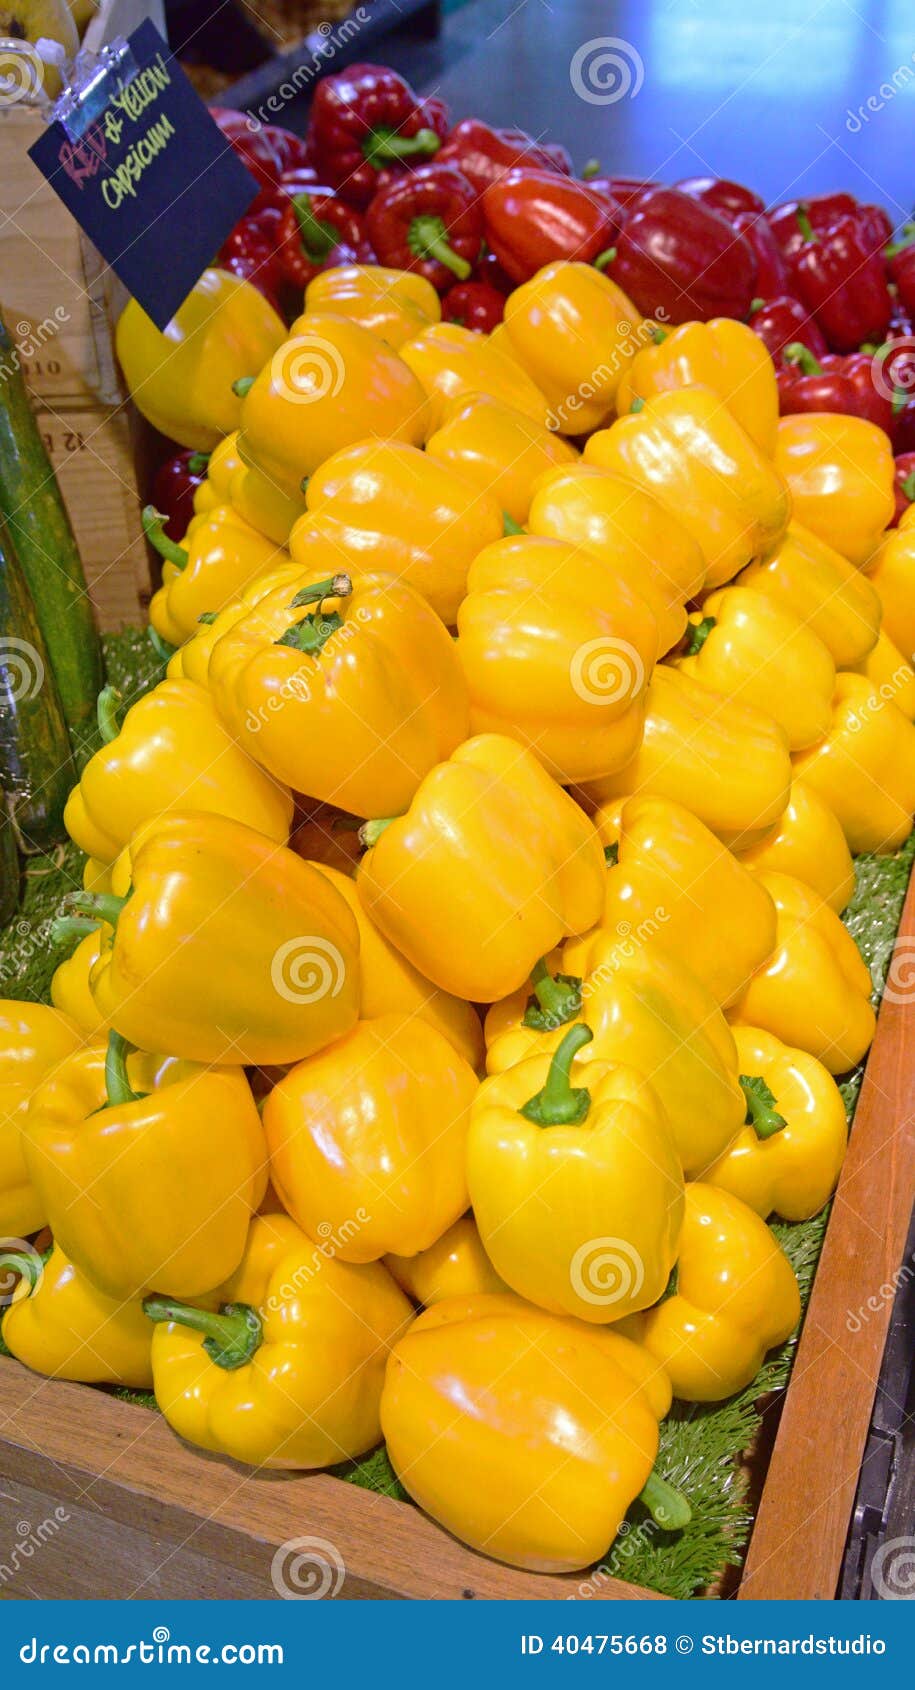 bright yellow capsicum with red ones in the background